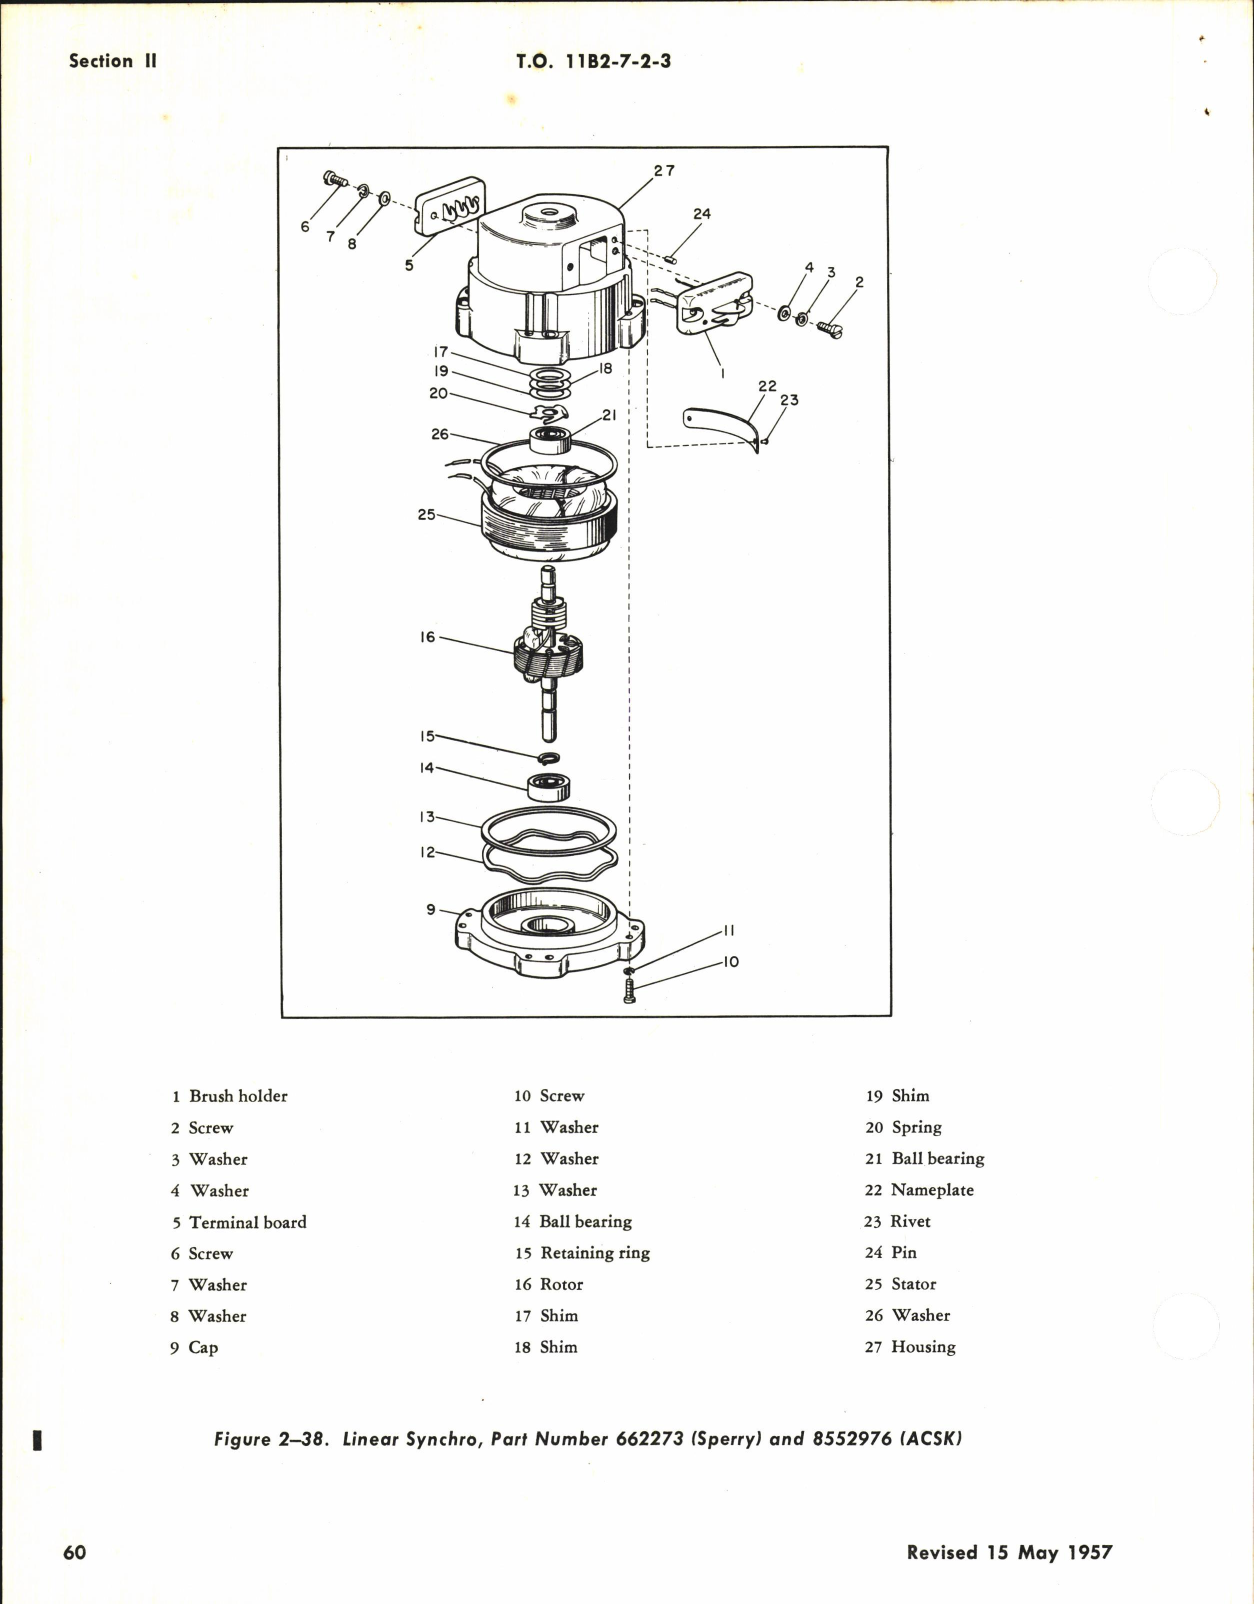 Sample page 8 from AirCorps Library document: Overhaul Instructions for Stabilization Amplifier Type B-1 and Electronic Control Stabilization Amplifier Type MD-2